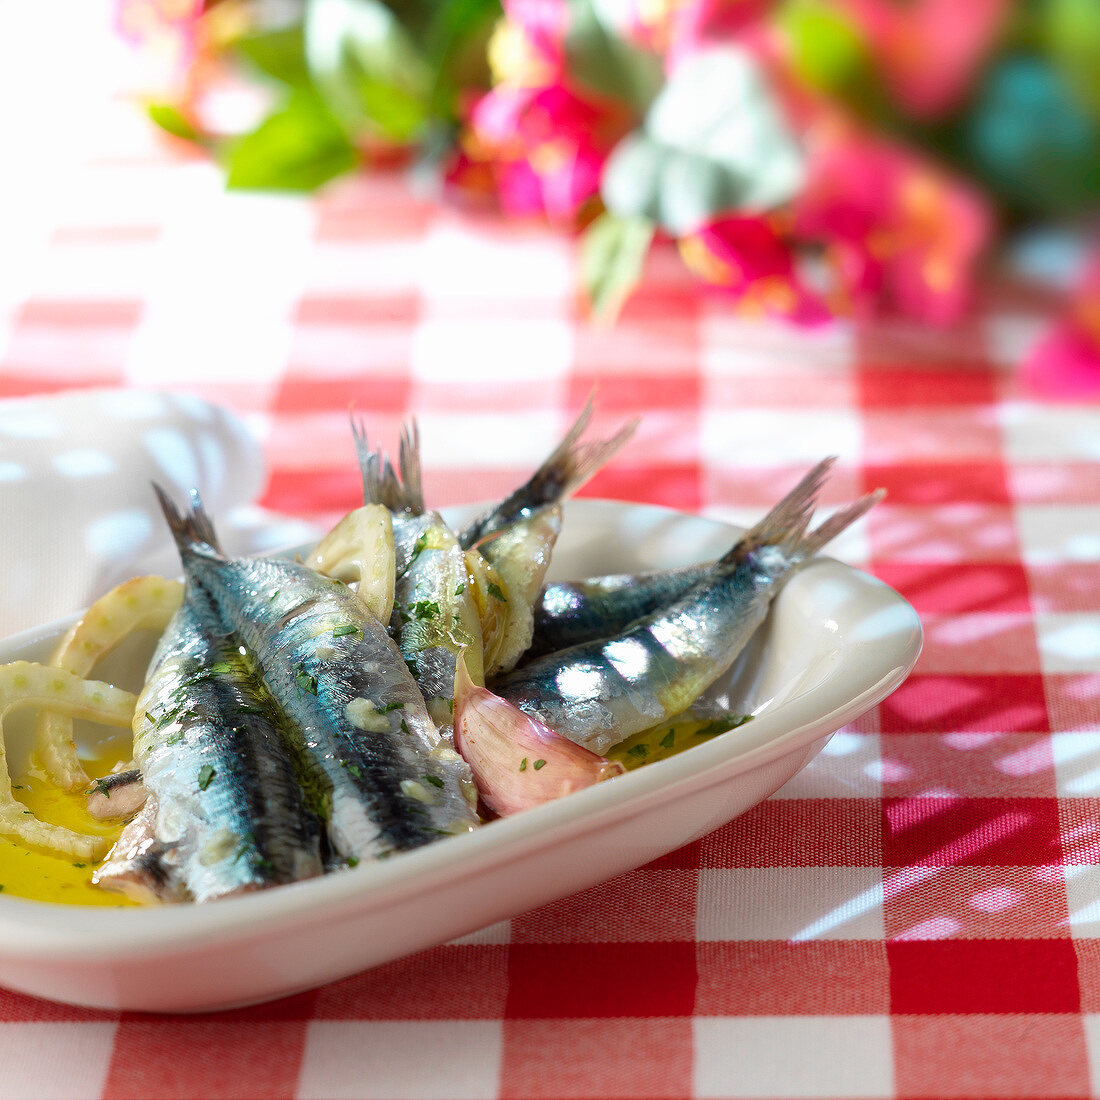 Marinated anchovies with garlic and fennel,Italy